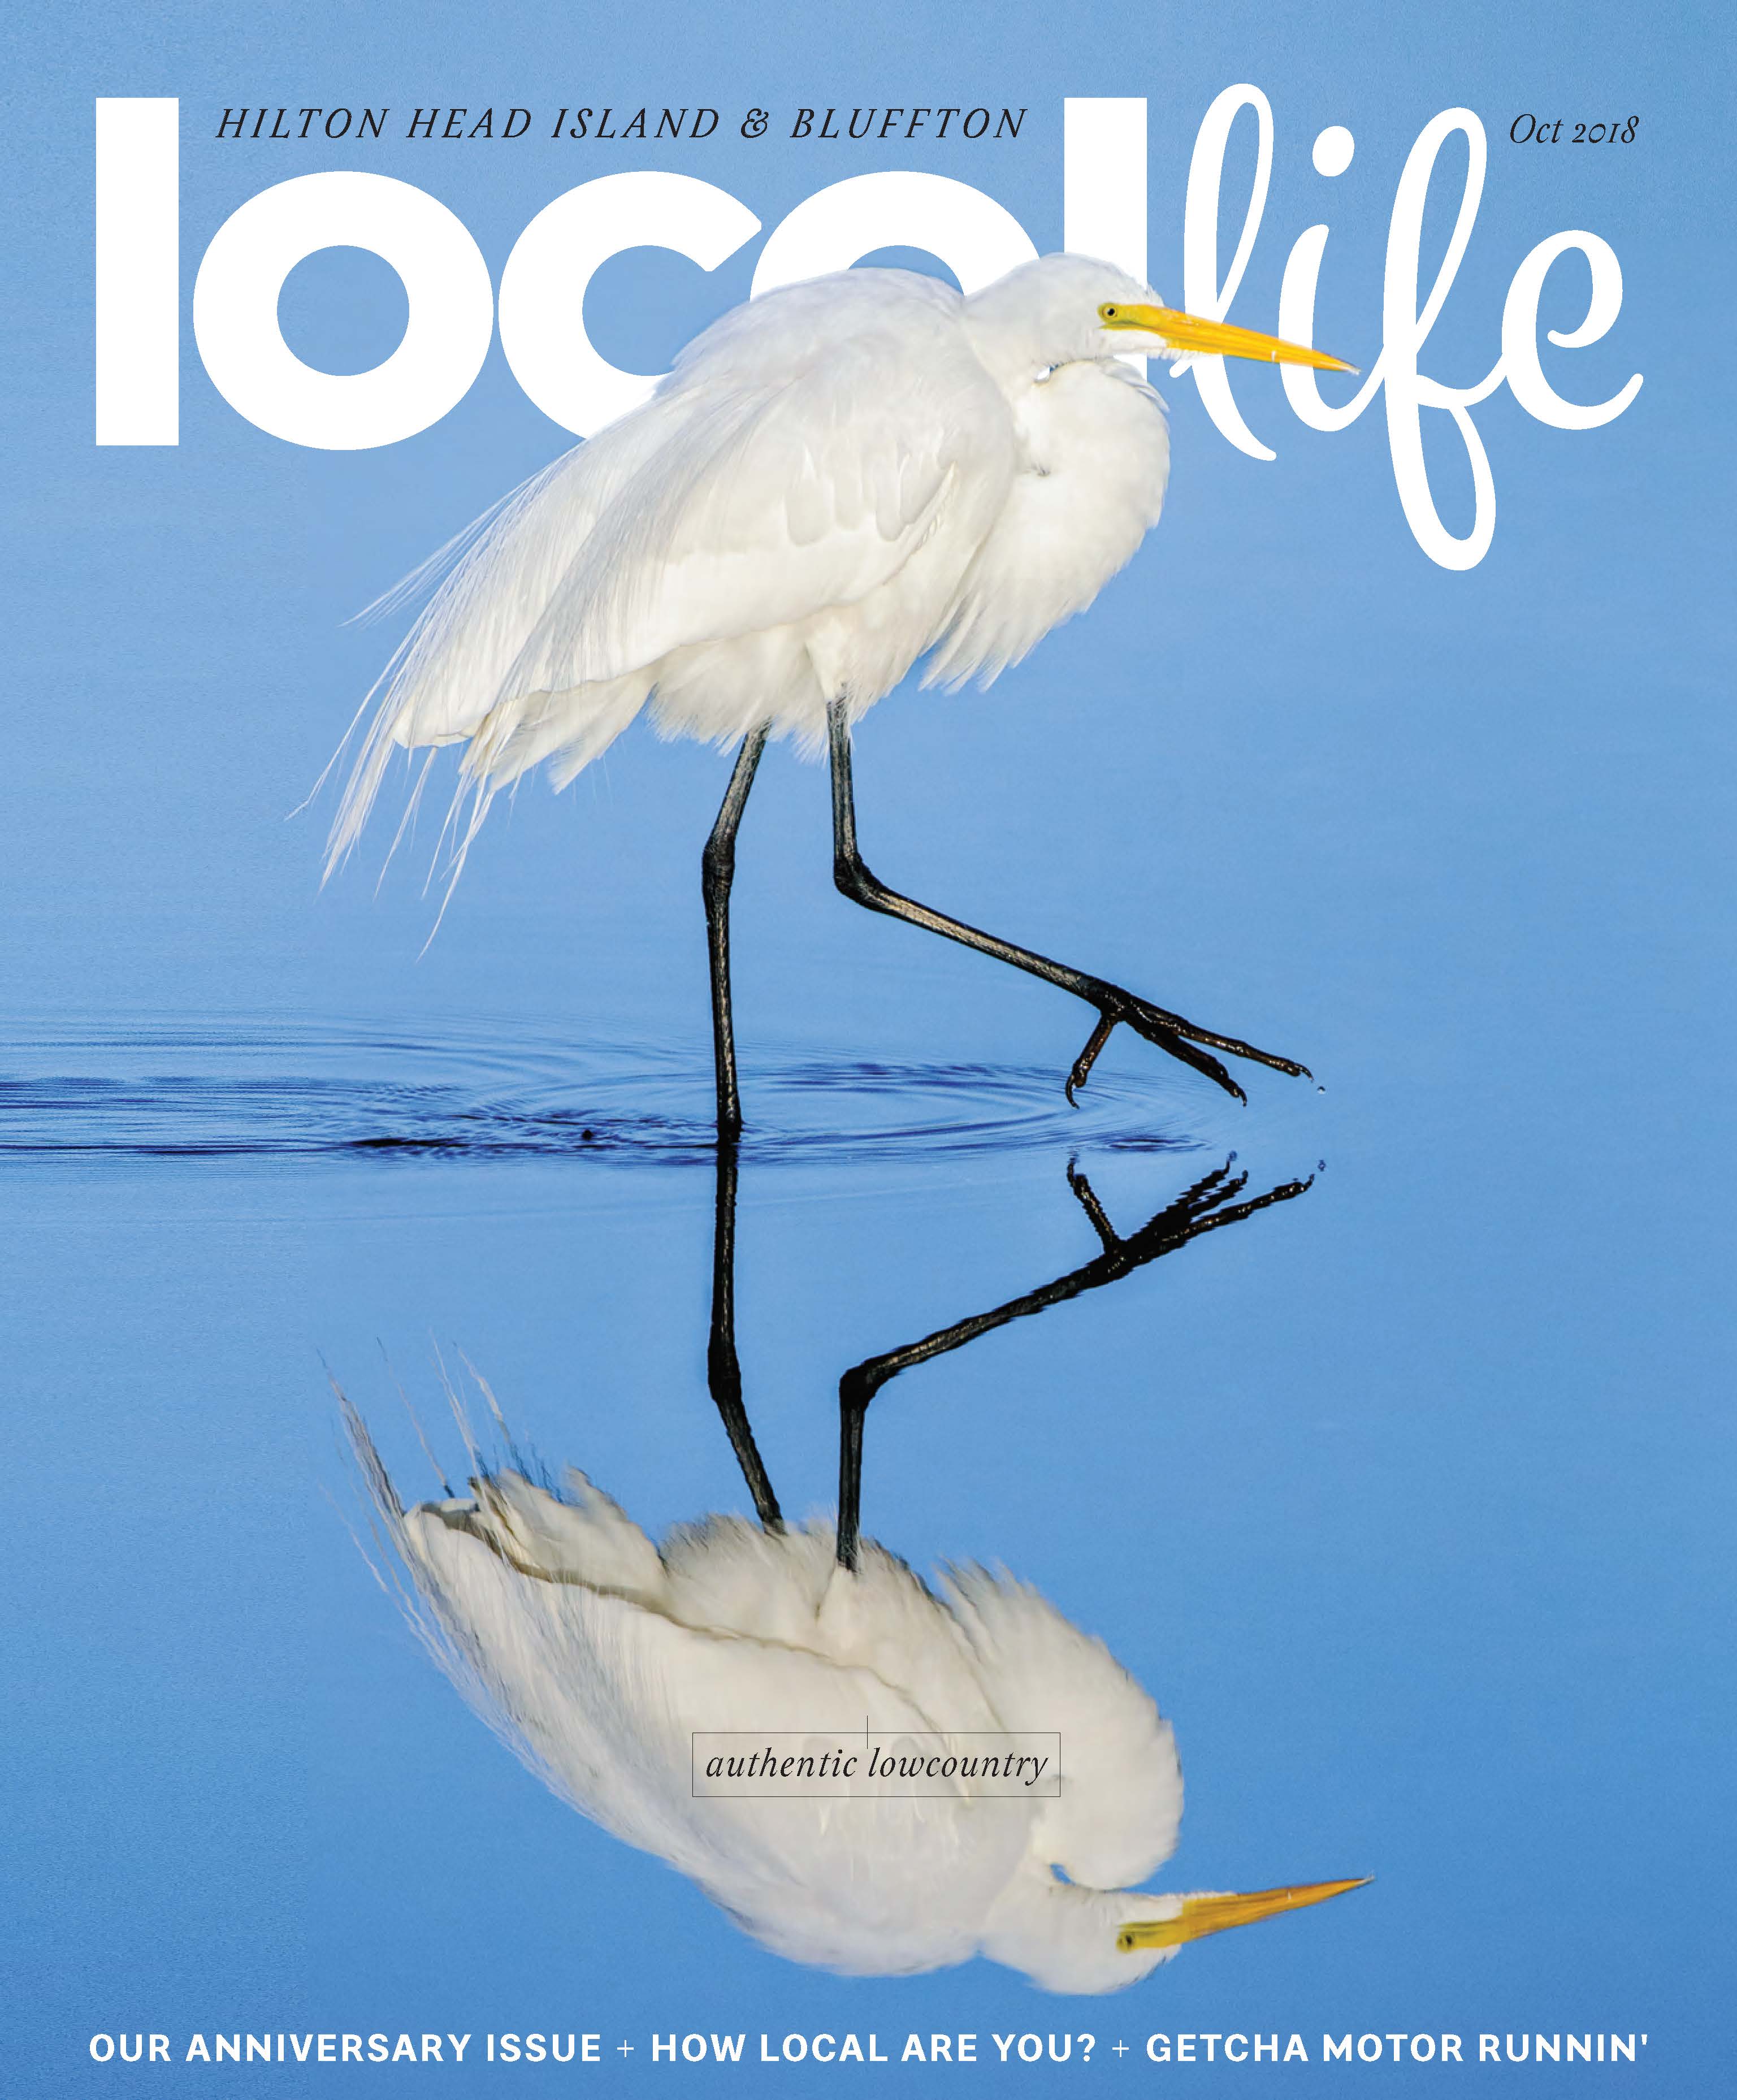 the cover of Local Life magazine October 2018 issue